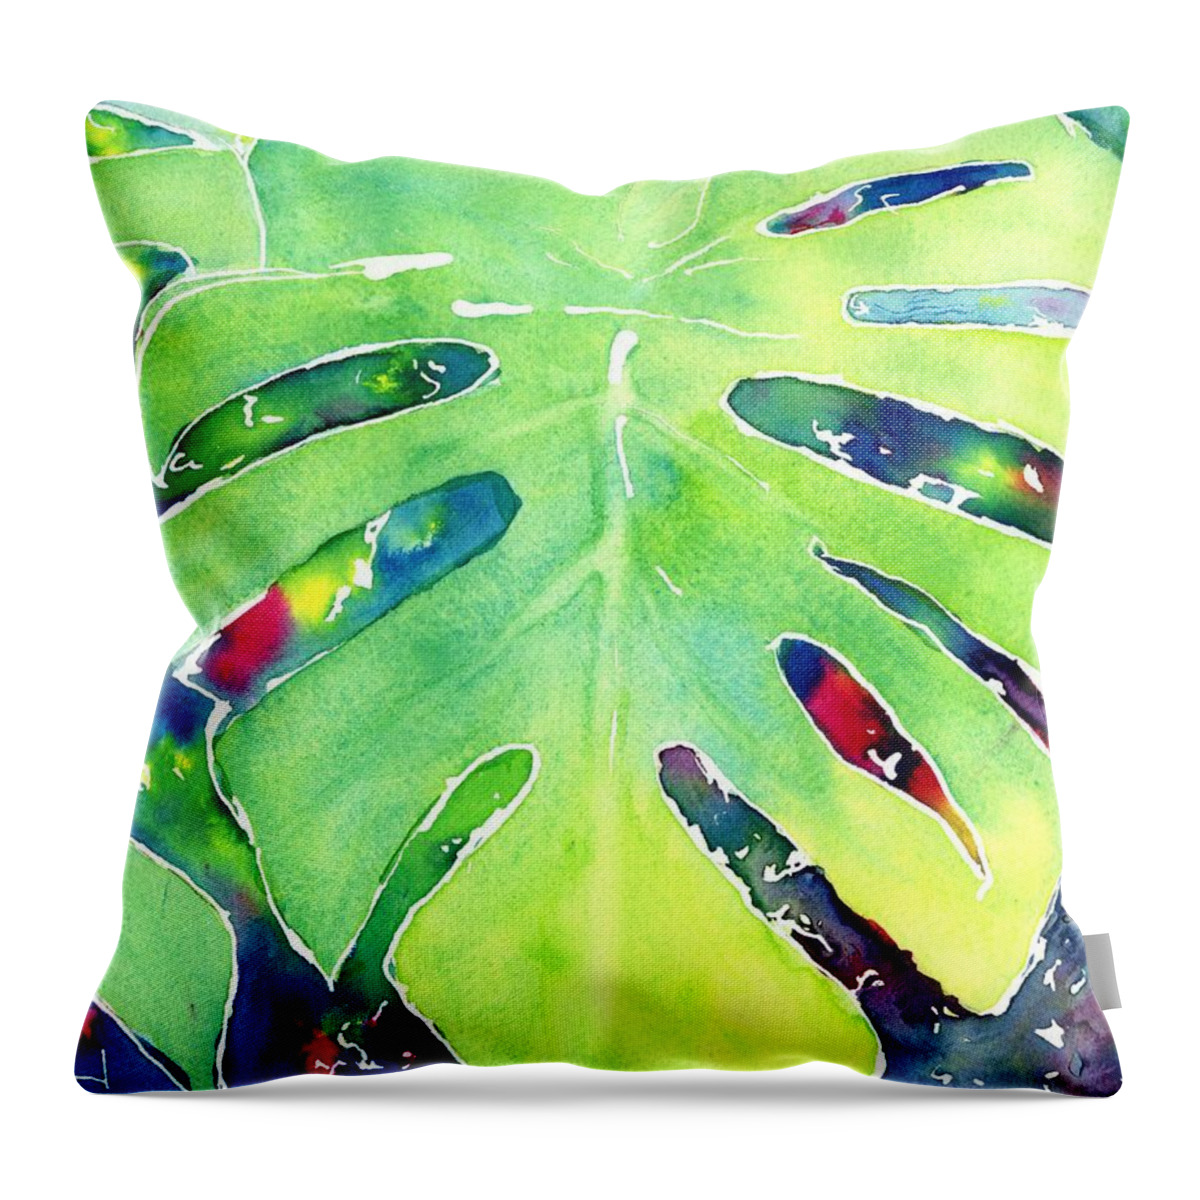 Leaf Throw Pillow featuring the painting Monstera Tropical Leaves 1 by Carlin Blahnik CarlinArtWatercolor